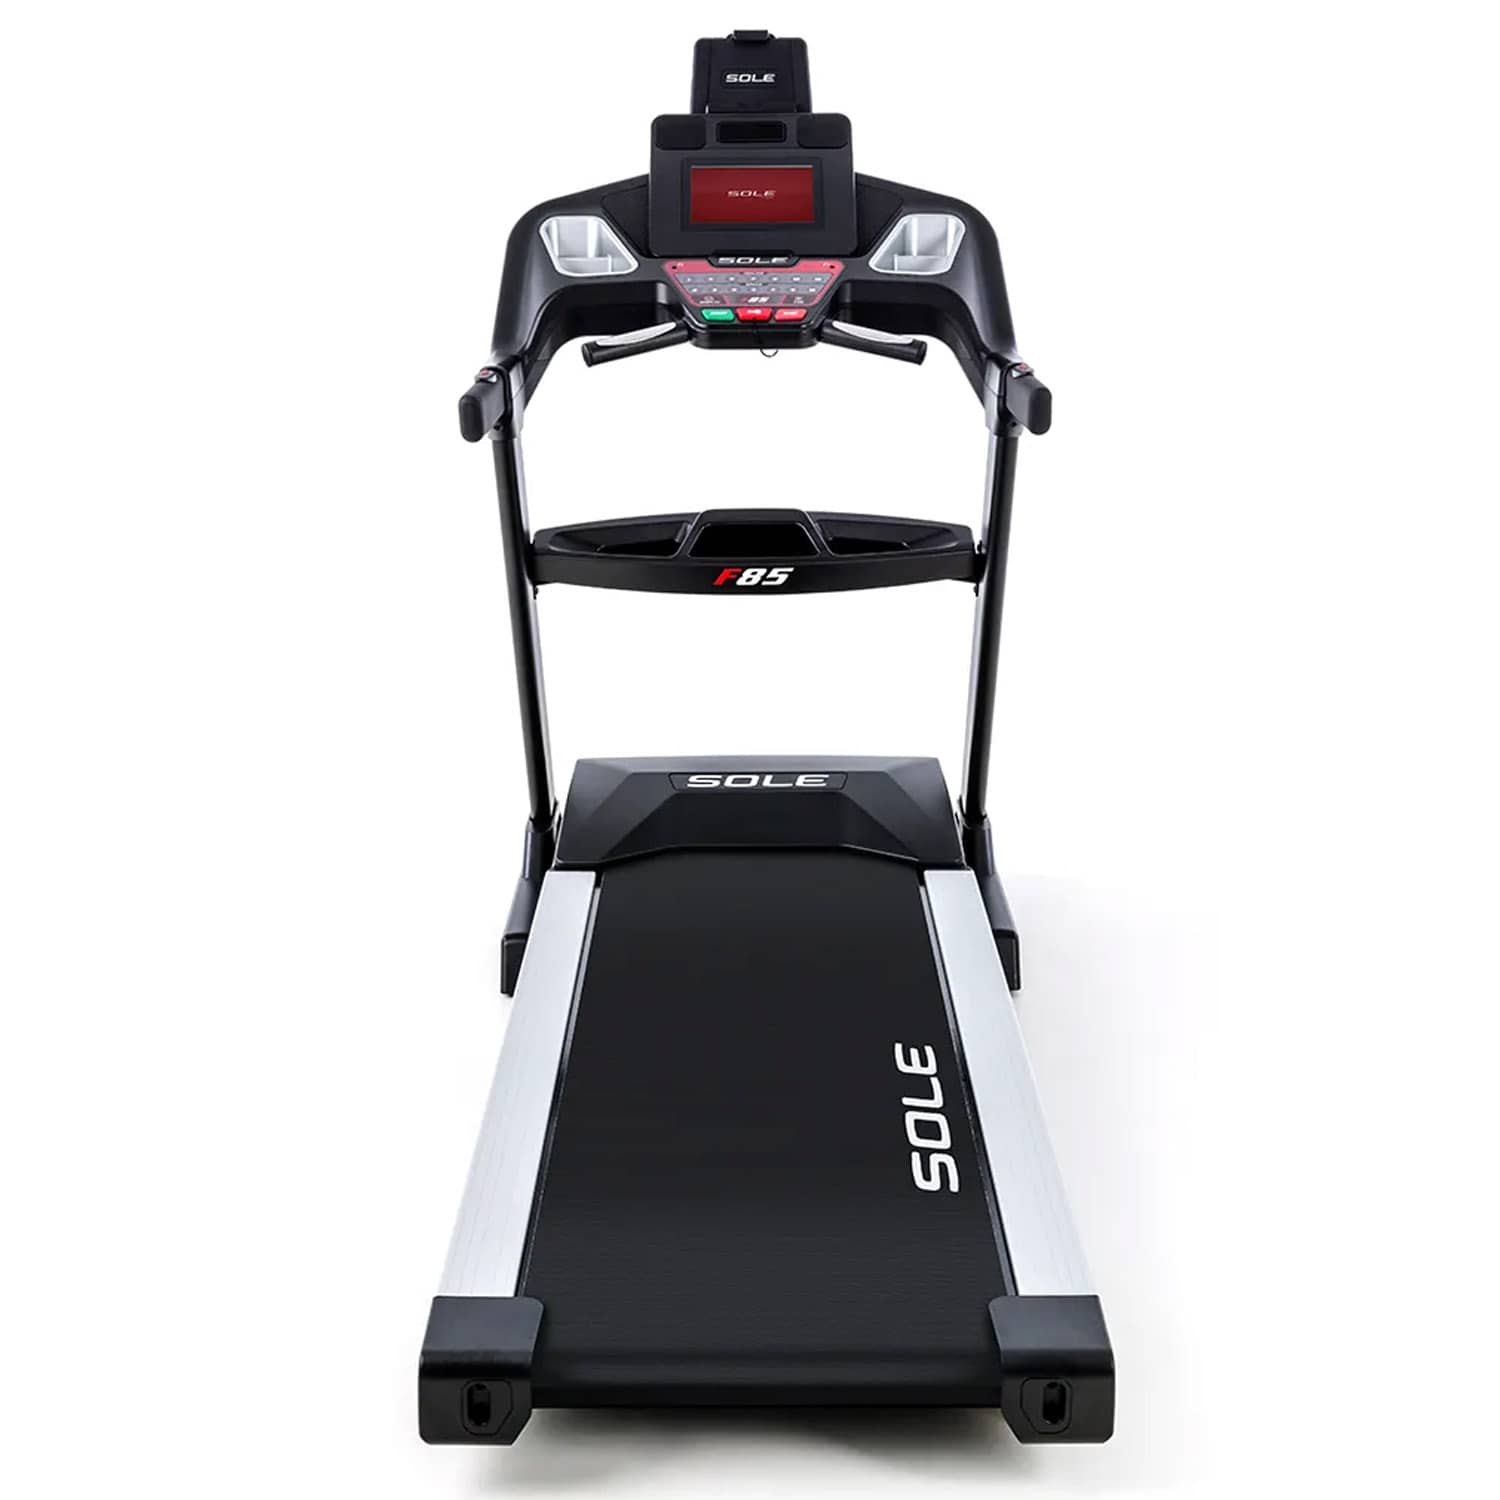 ARGT Sole Fitness F85 Home Use Treadmill with Touch Screen & Wifi